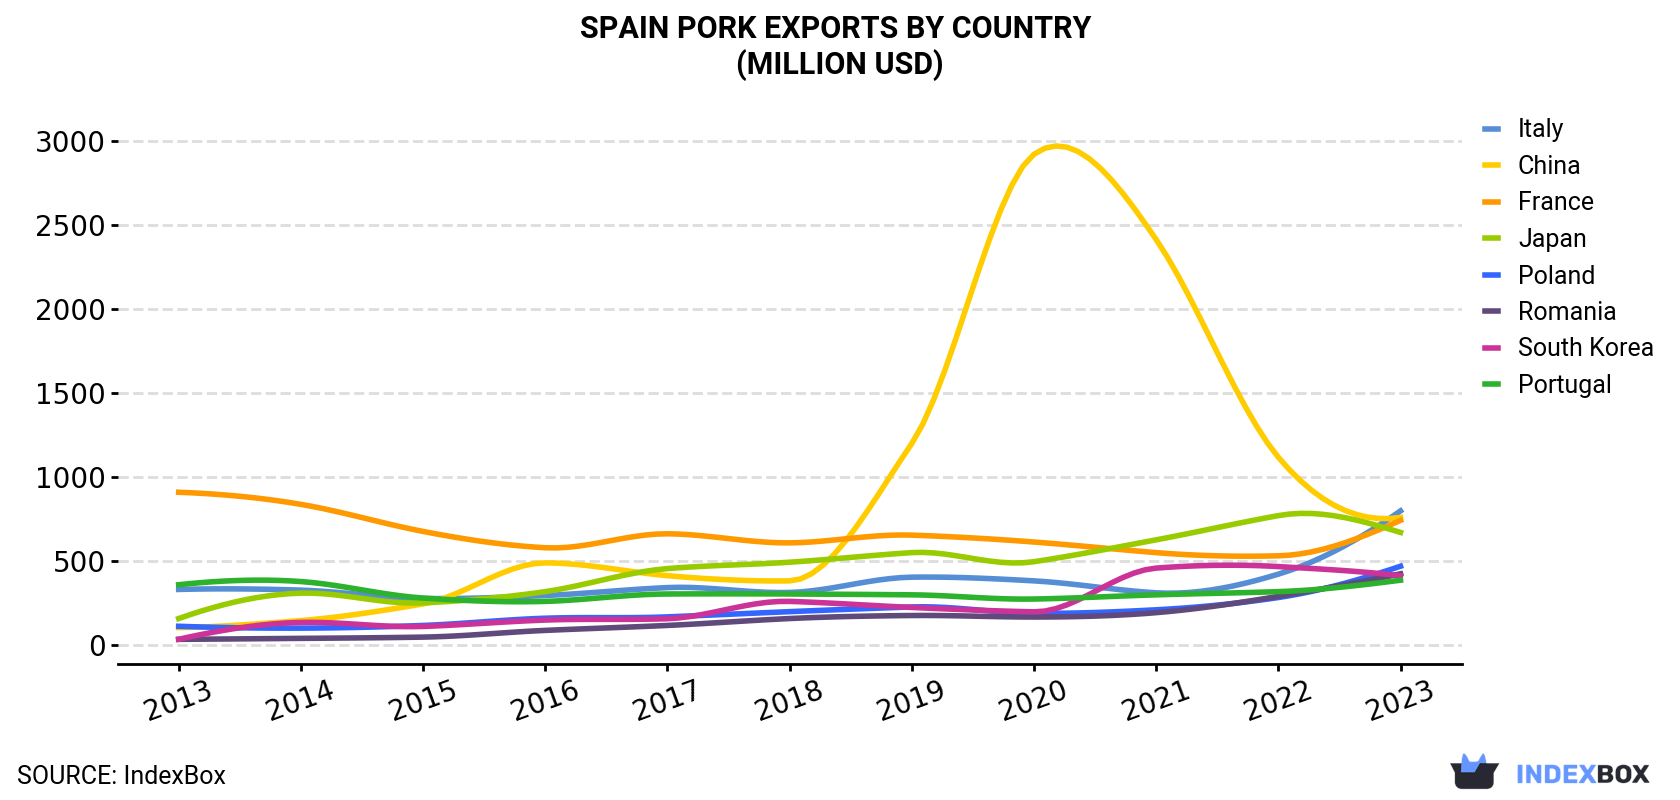 Spain Pork Exports By Country (Million USD)